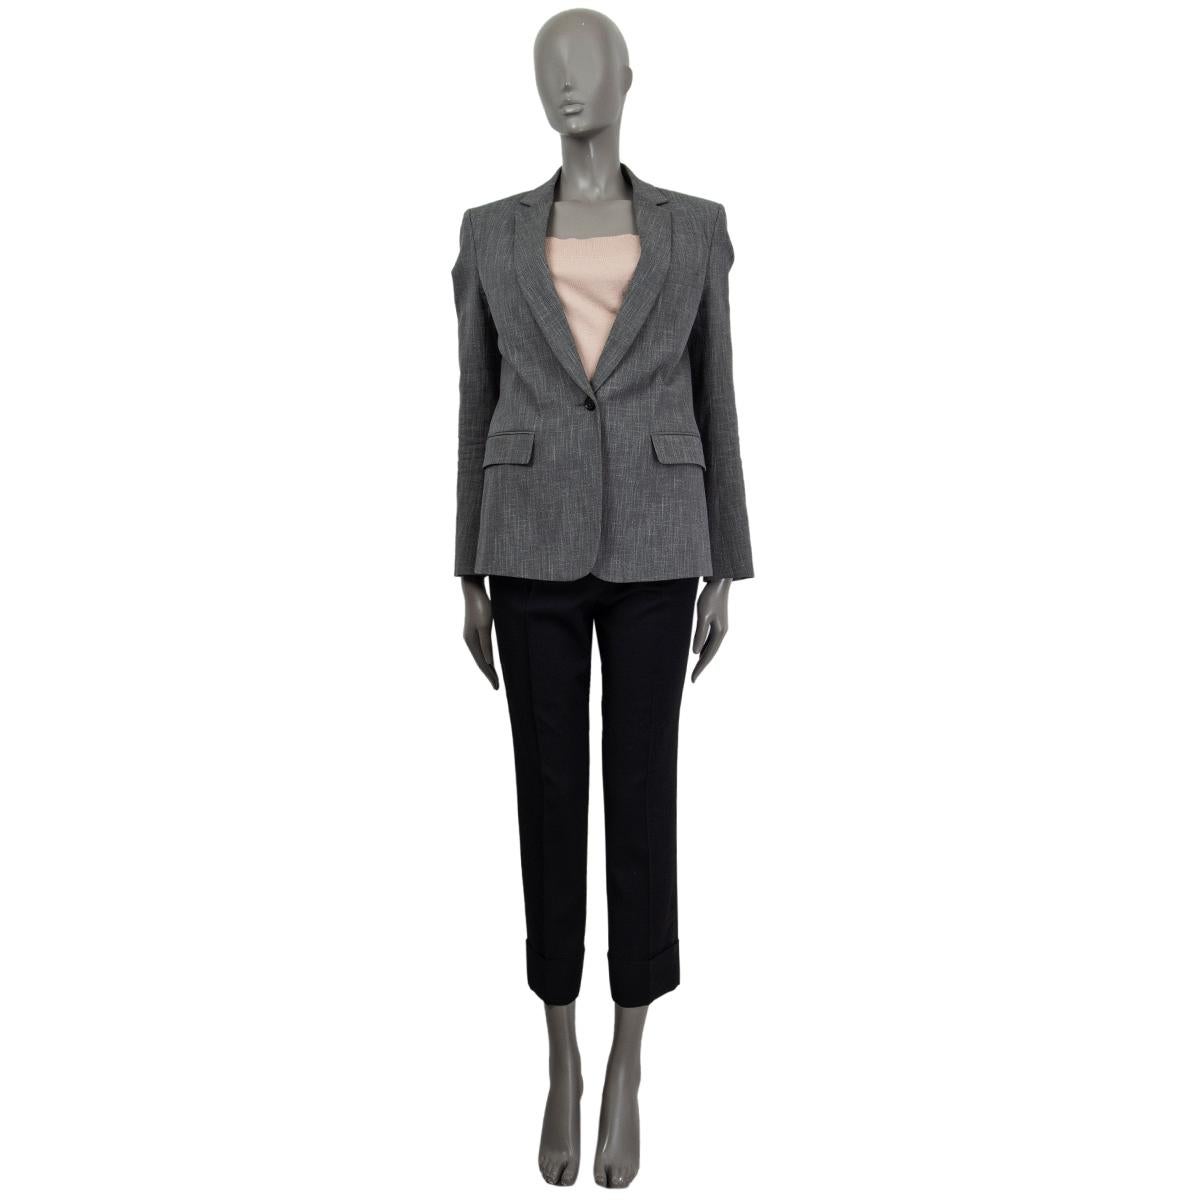 100% authentic Balmain classic fitted one.button blazer in grey melange cotton (94%) polyamide (4%) and elastane (2%) featuring two flap pockets and on slit chest pocket. Lined in black viscose (52%) and cotton (48%). Has been worn and is in